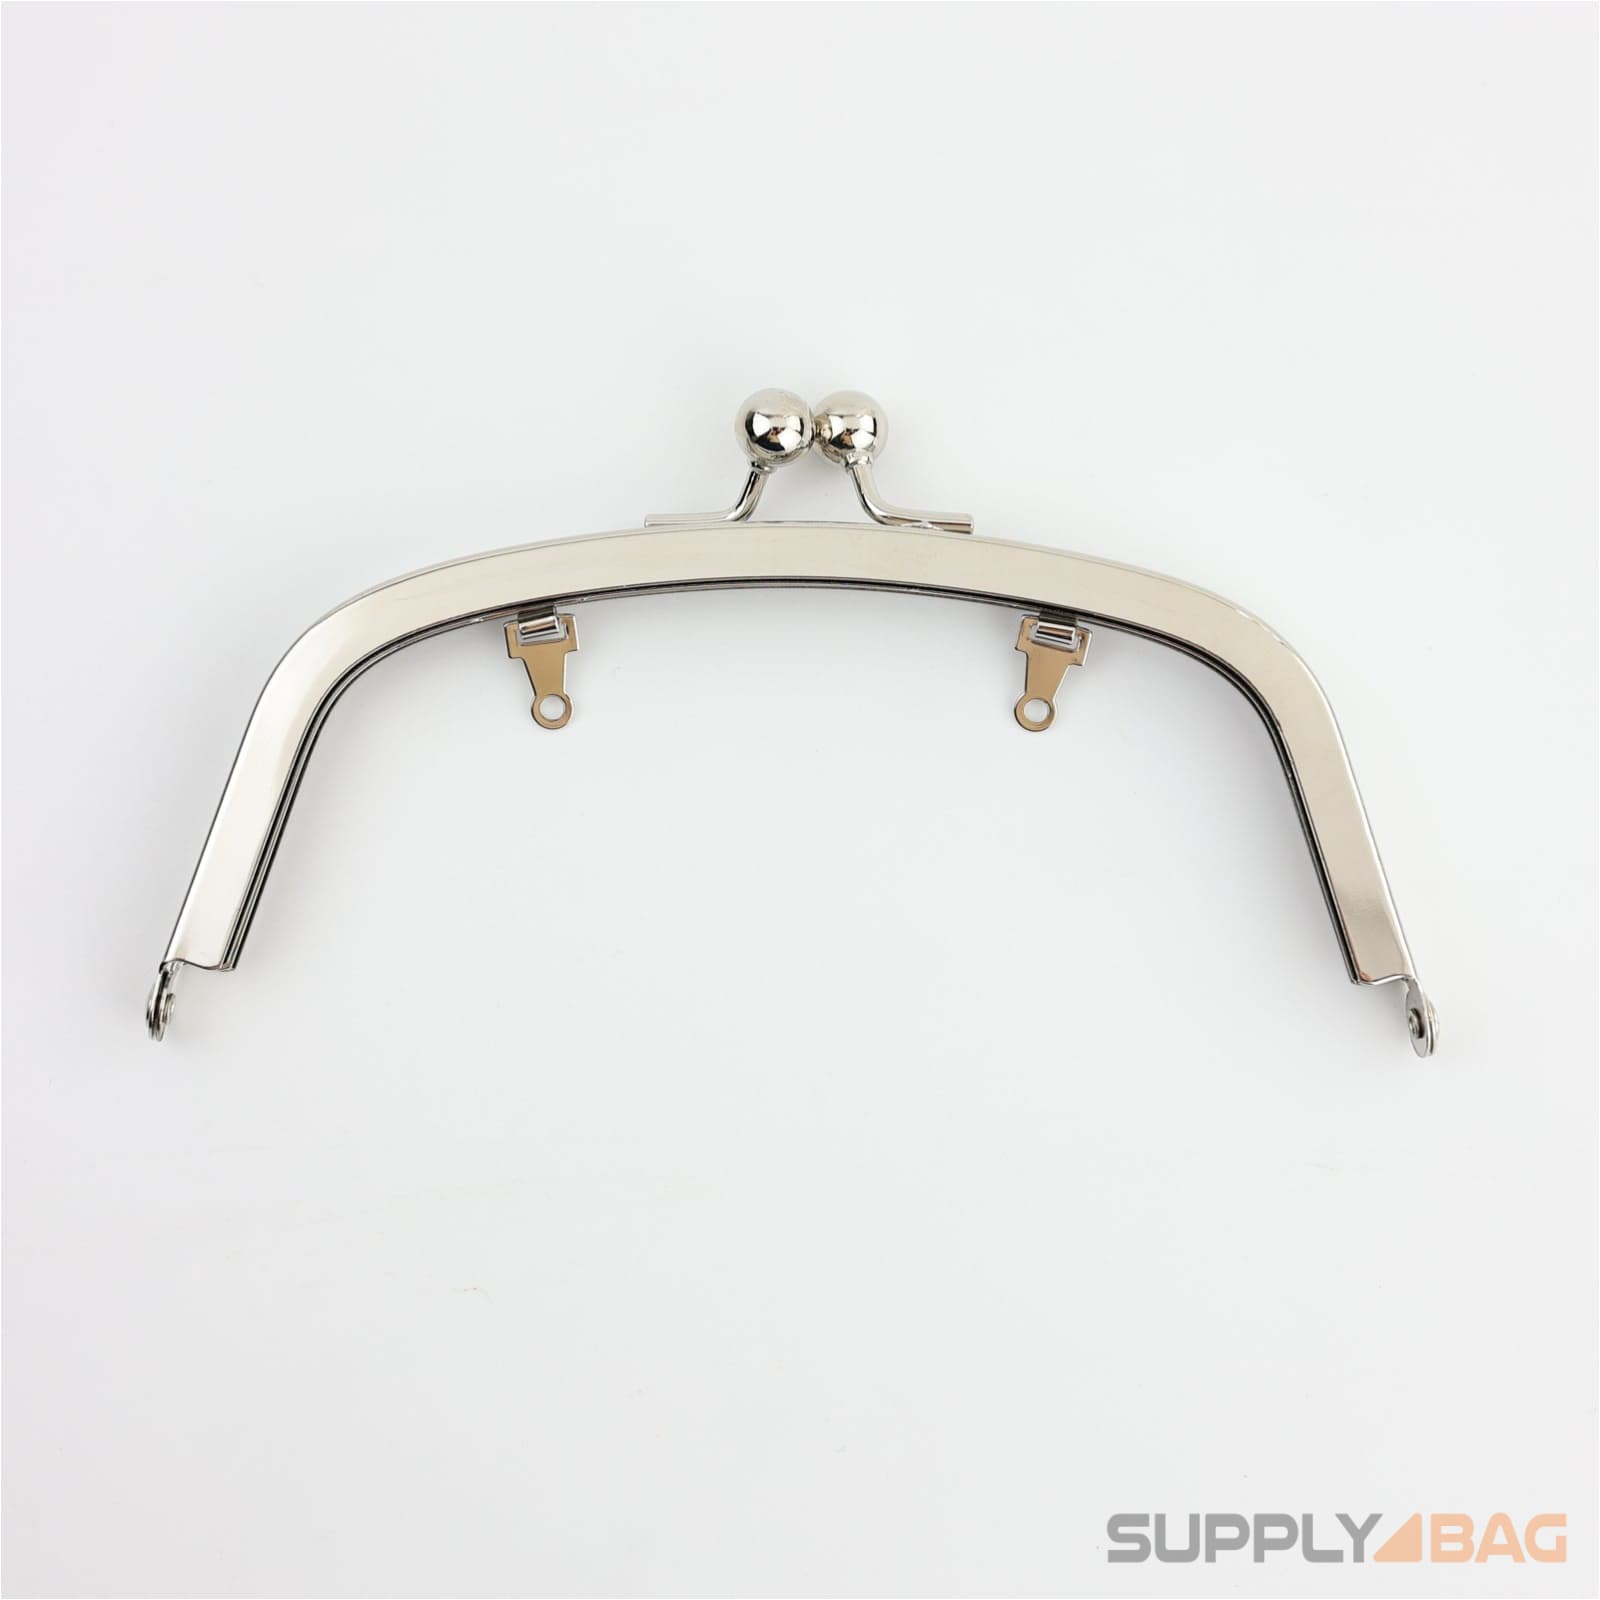 6.5 inch Arched Shape Silver Metal Purse Frame with Chain Loops